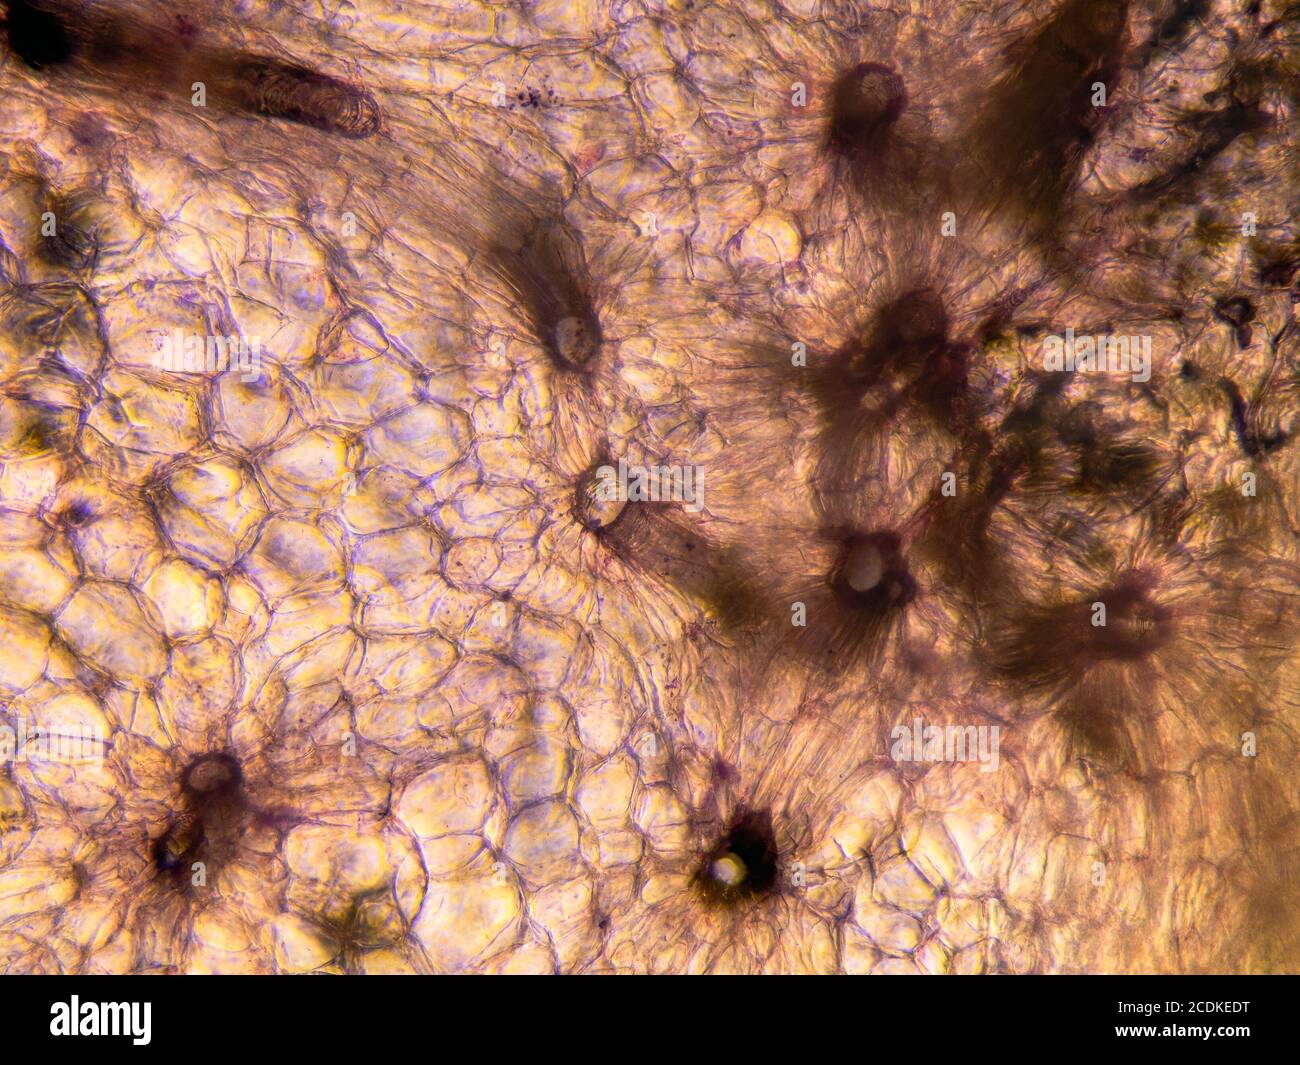 Microscopic view carrot root cells. Cross section. Optical compound microscope. Brightfield. Objective 10x. Stock Photo